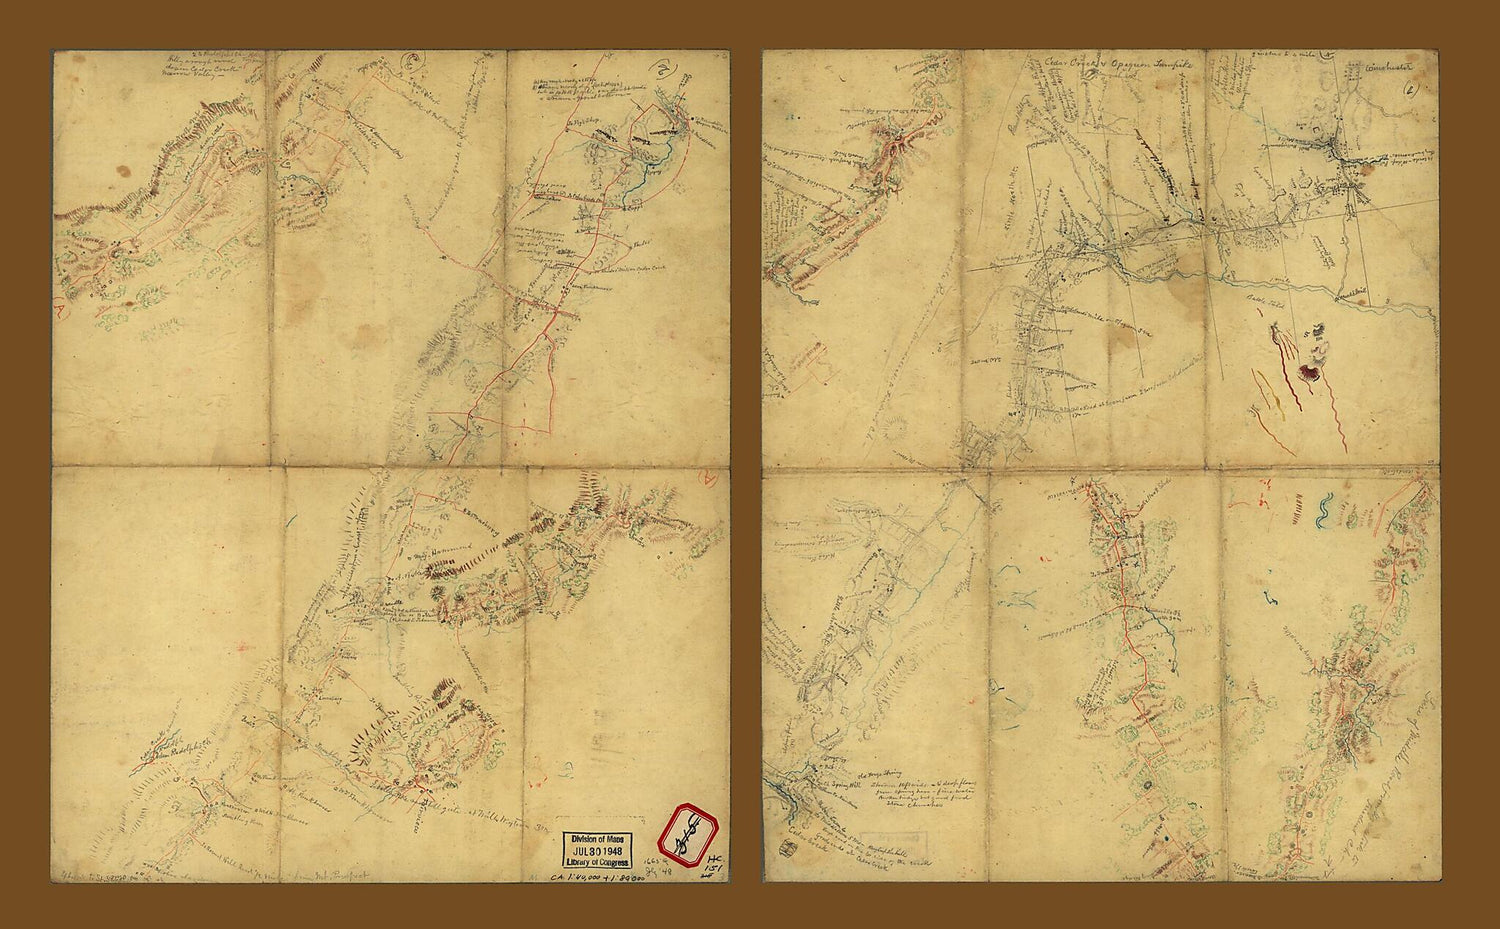 This old map of Sketches of Roads In the Shenandoah Valley Between Winchester and Woodstock, Virginia from 1863 was created by  in 1863